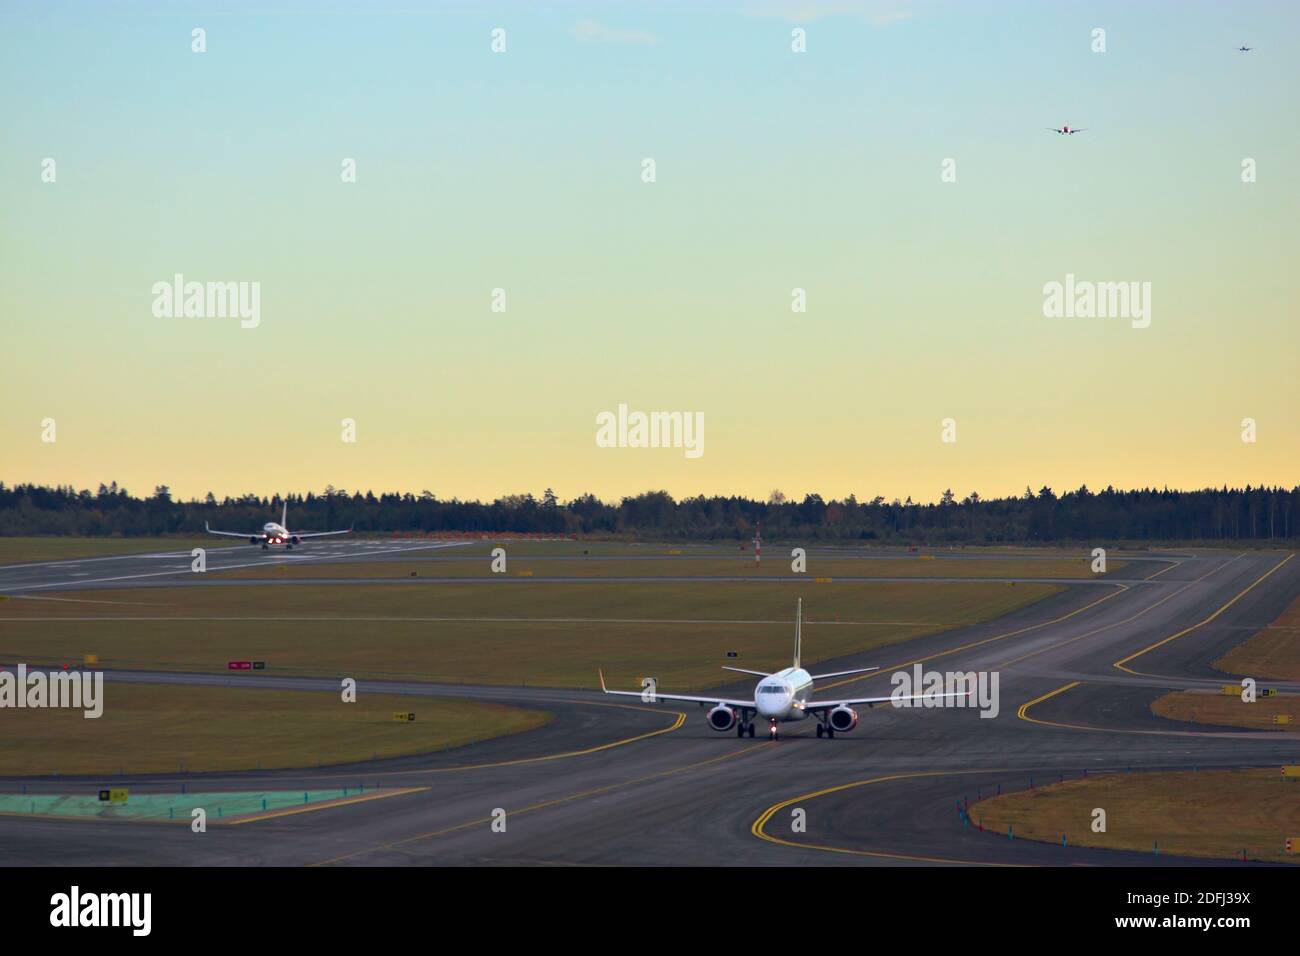 Taxiing and landing airplanes and two airplanes in the air in queue to land Stock Photo